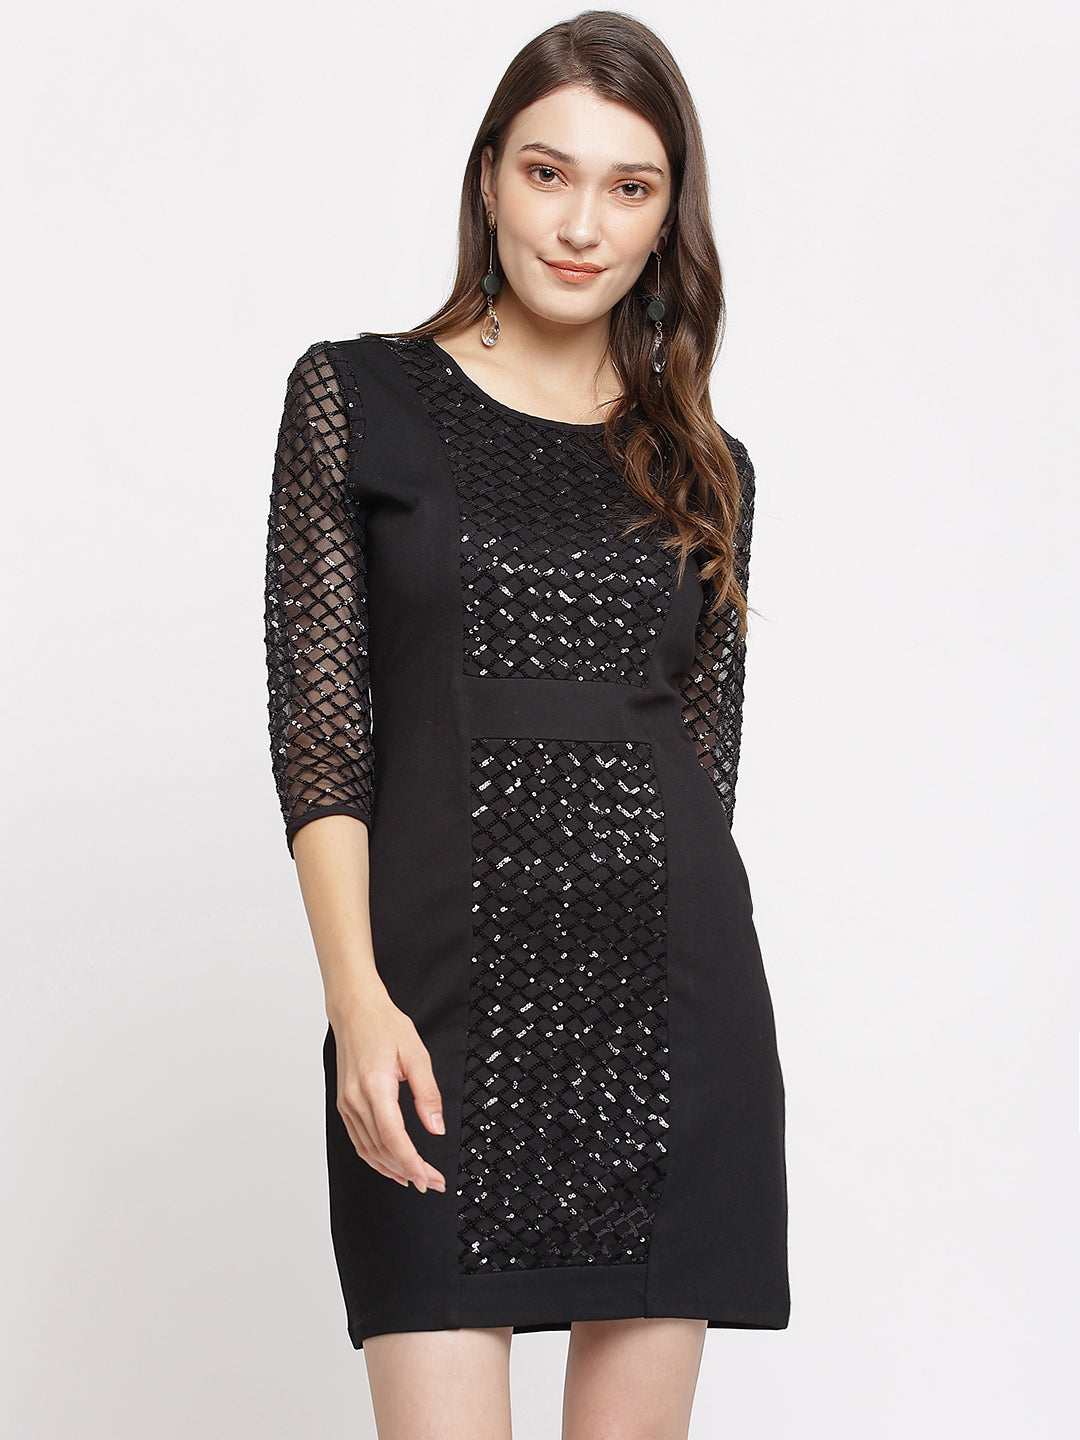 Black Solid Dress With 3/4 Sleeve